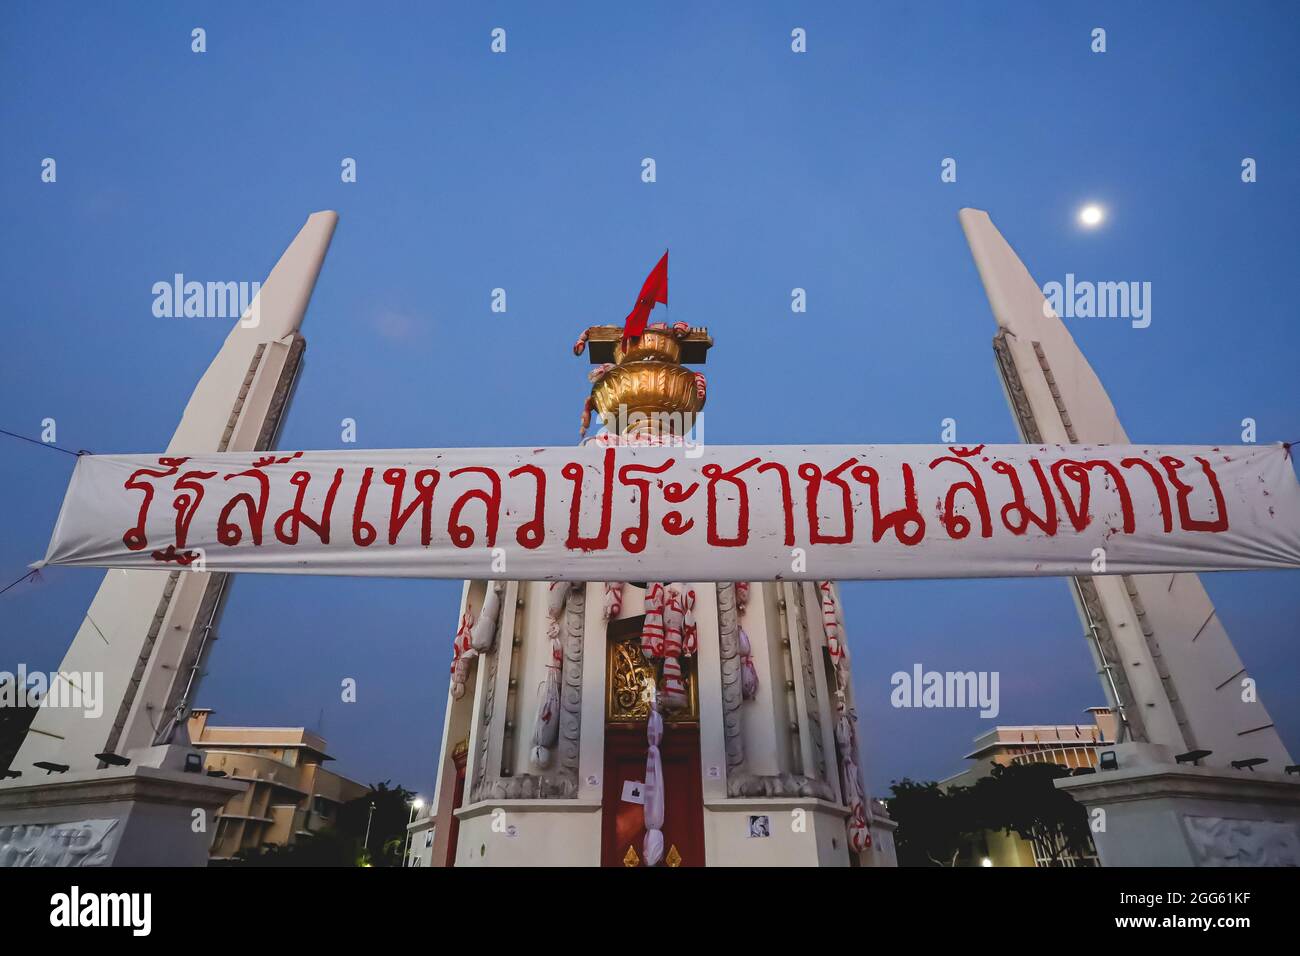 Bangkok, THAILAND - August 18, 2021: "The state failed, the people died." Pro-democracy protesters "Thalufah" gather at Democracy Monument for Protest. Stock Photo